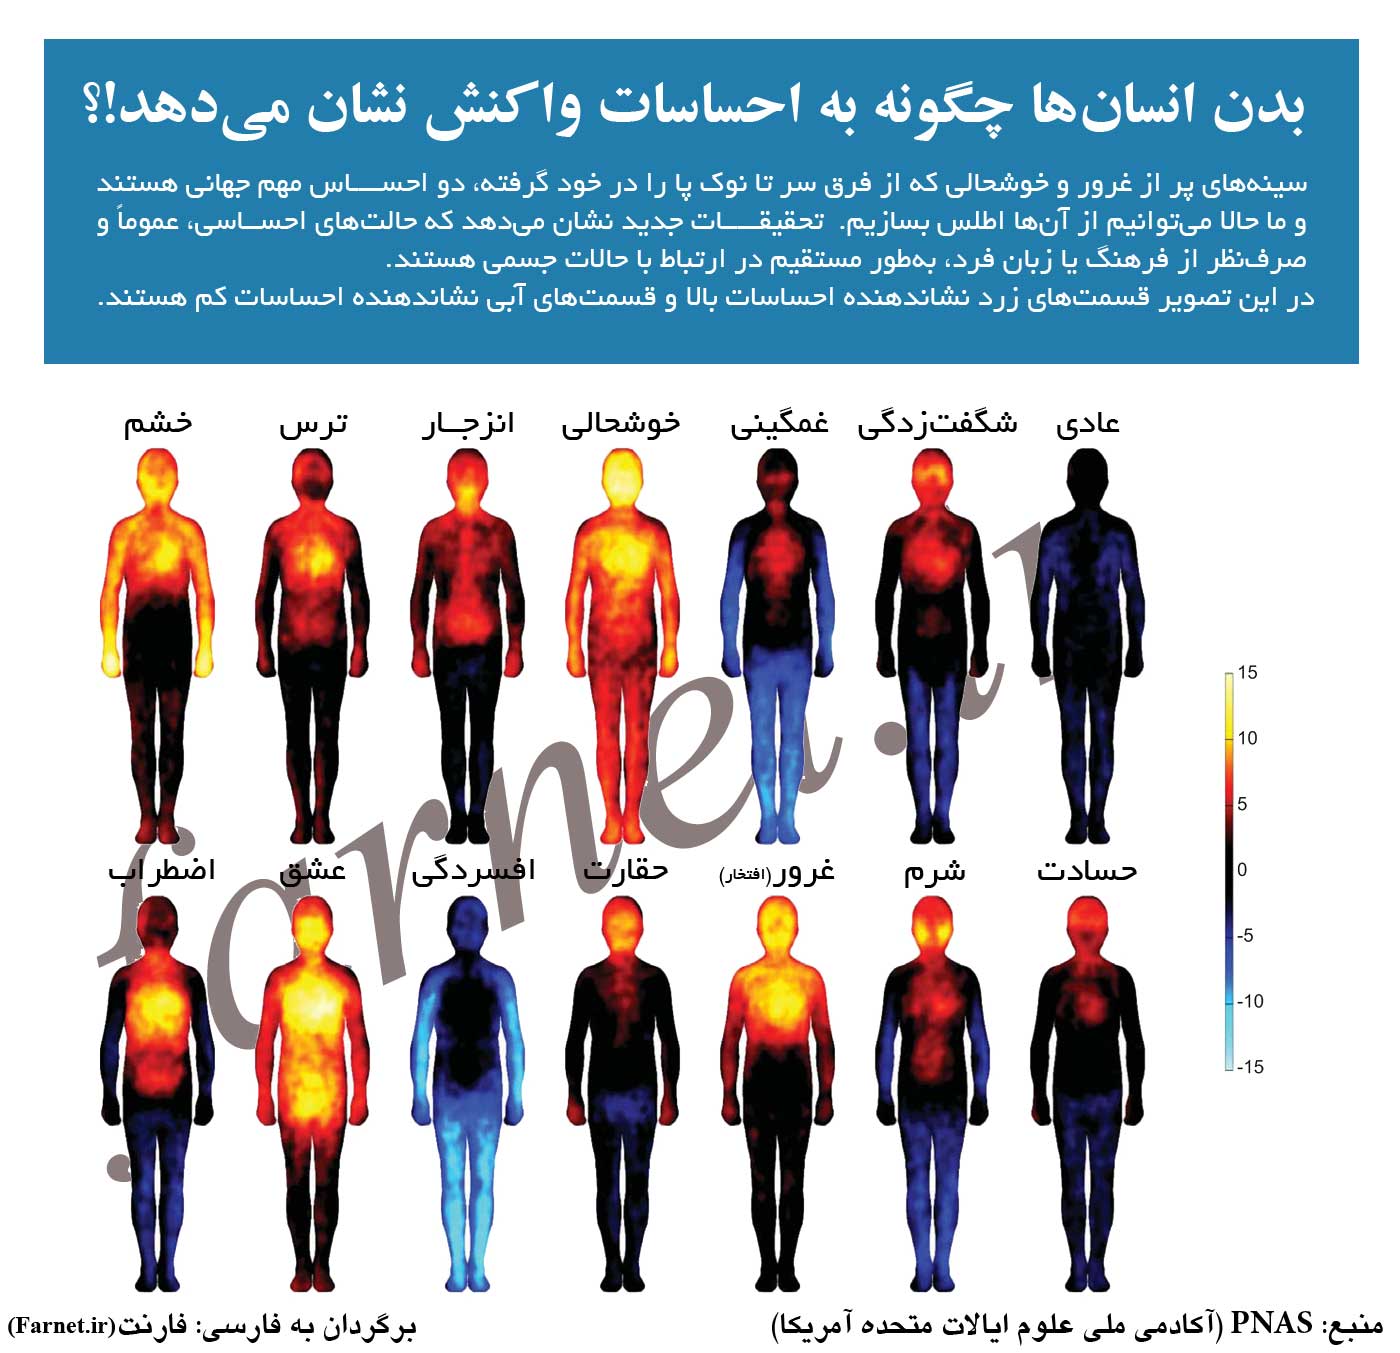 Body Atlas Reveals Where We Feel Happiness and Shame